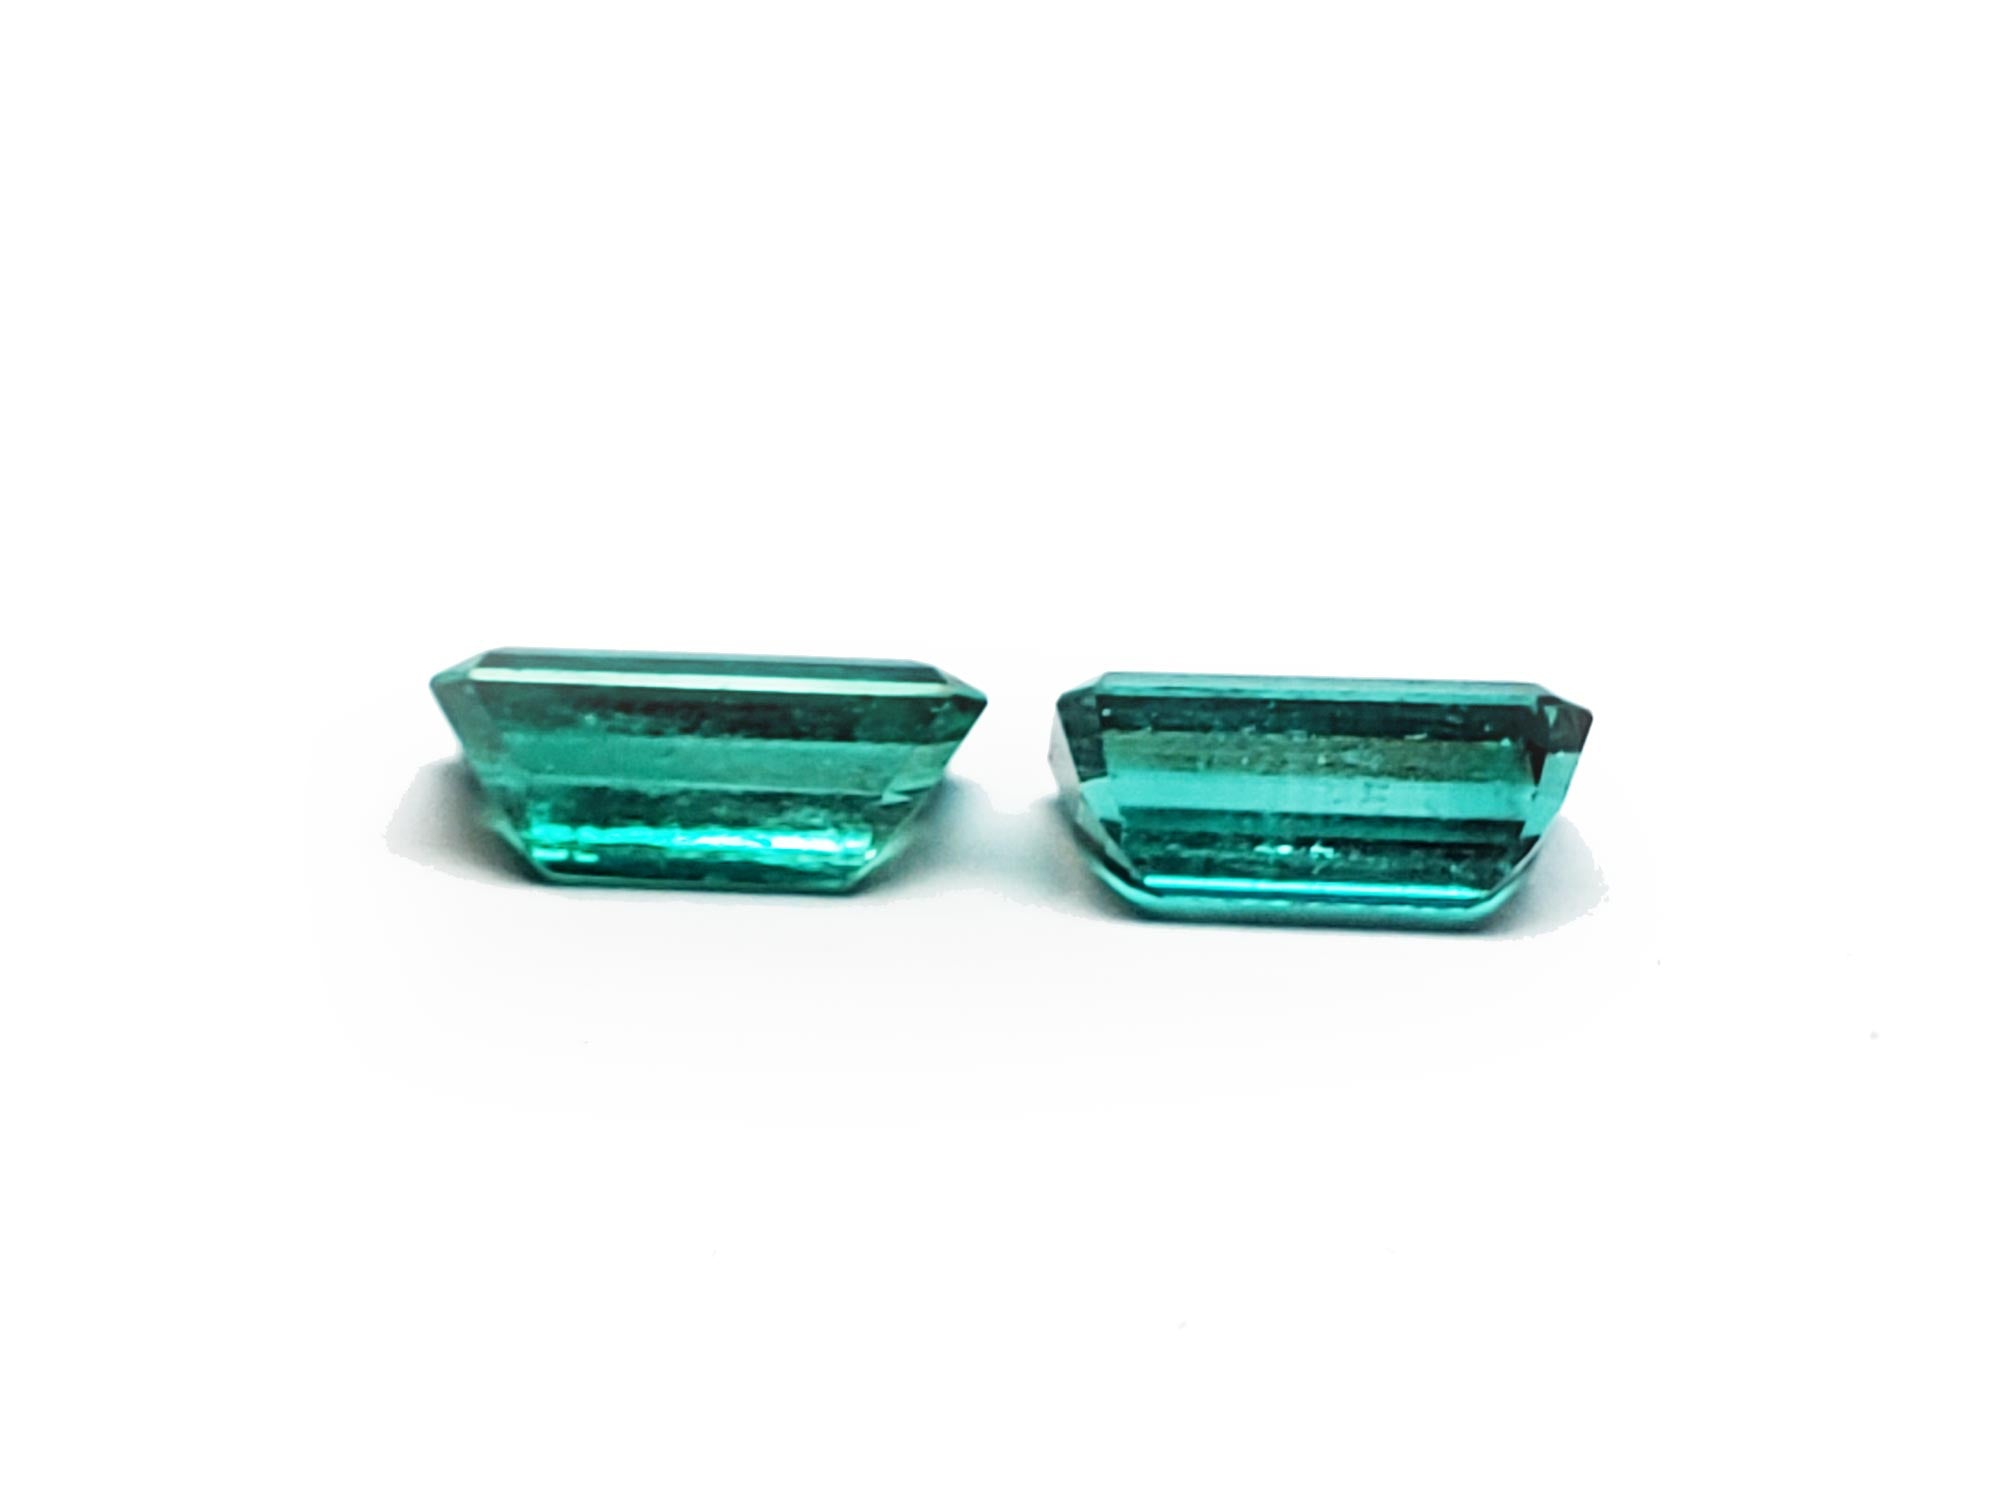 Loose matching pair emeralds for earrings